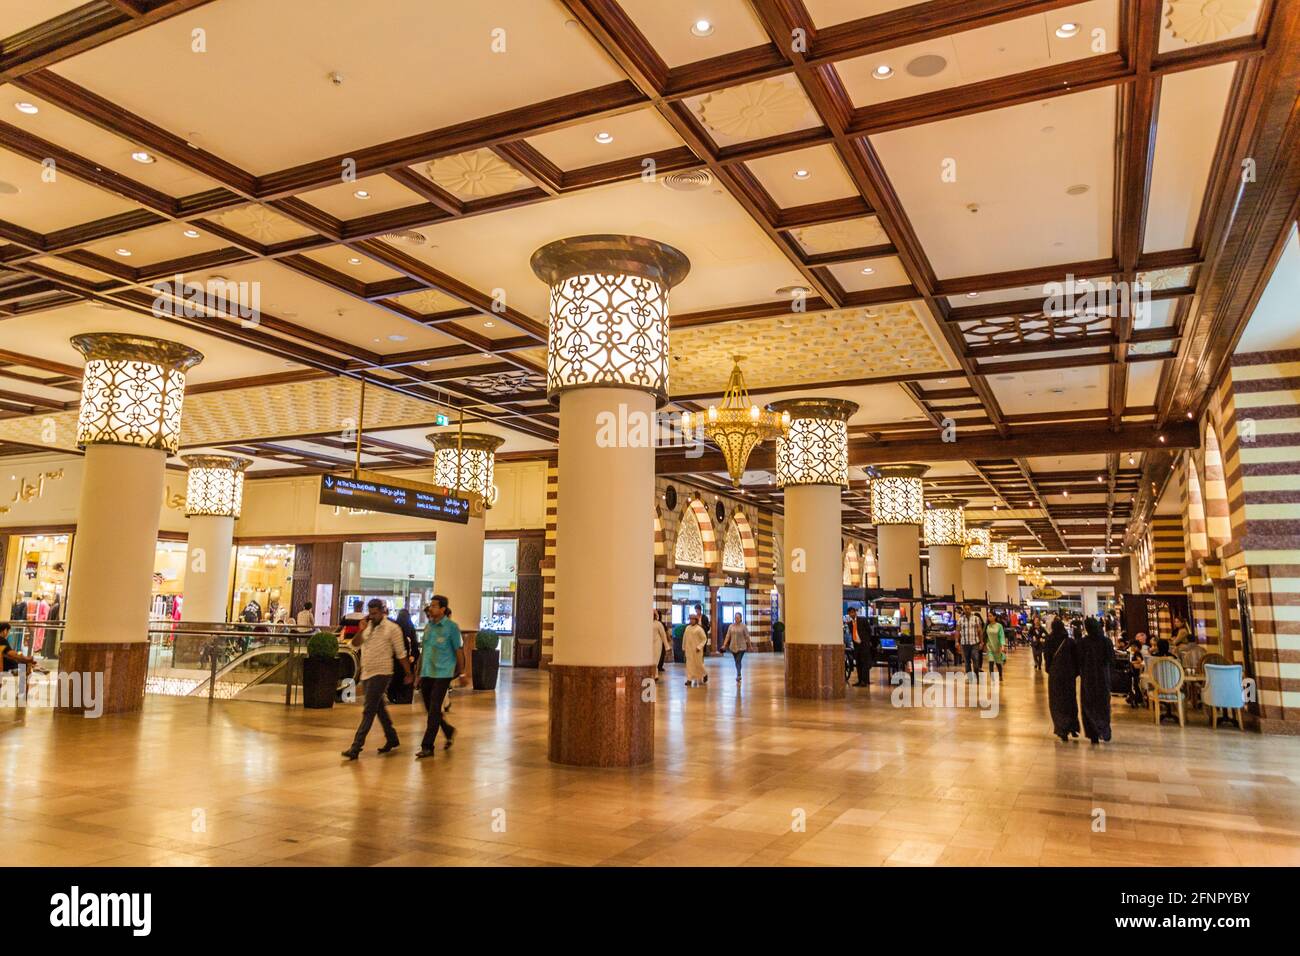 DUBAI, UAE - MARCH 10, 2017: Interior of the Dubai Mall, one of the largest malls in the world. Stock Photo